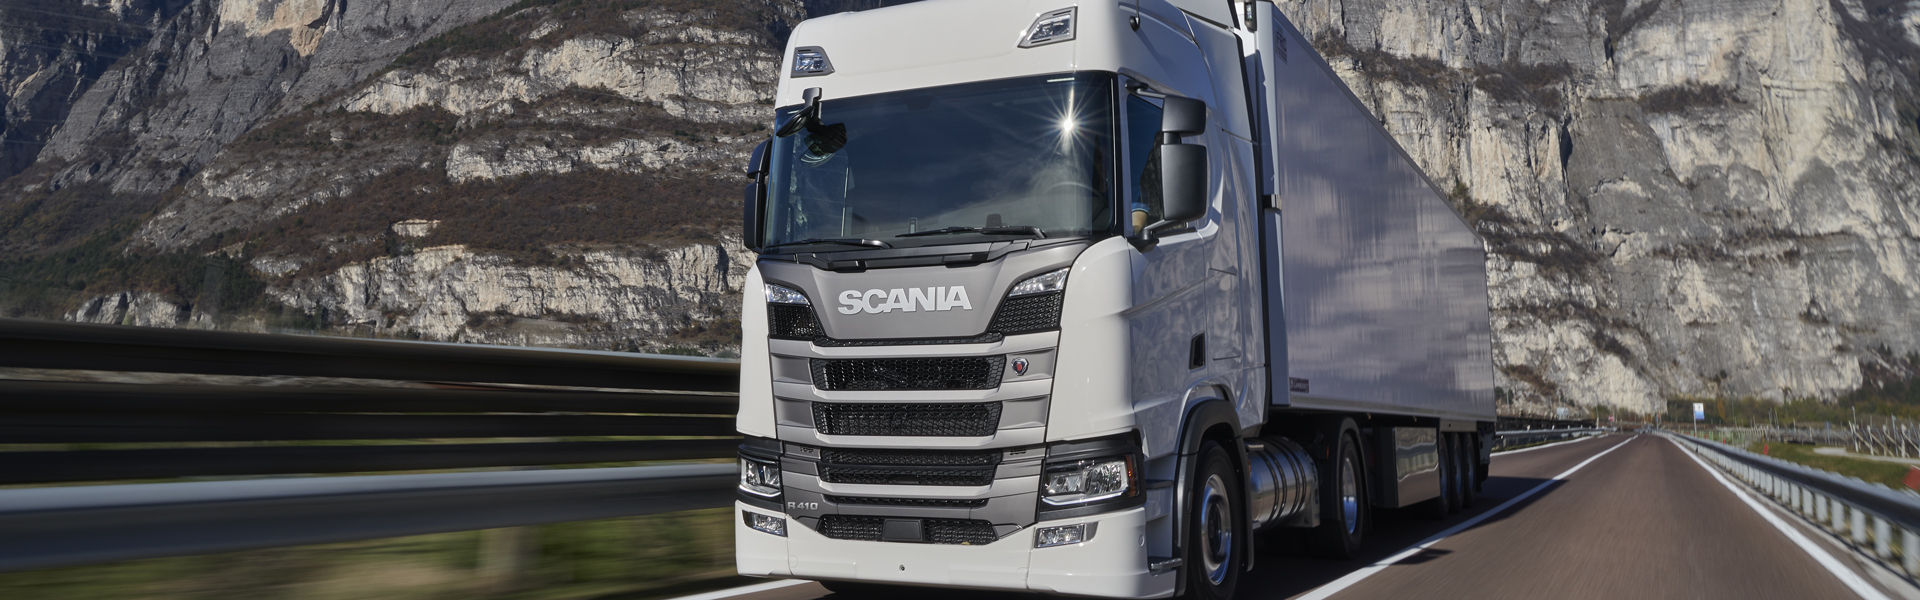 Scania Introduces Fuel-Efficient Biogas Engines with Super-Based